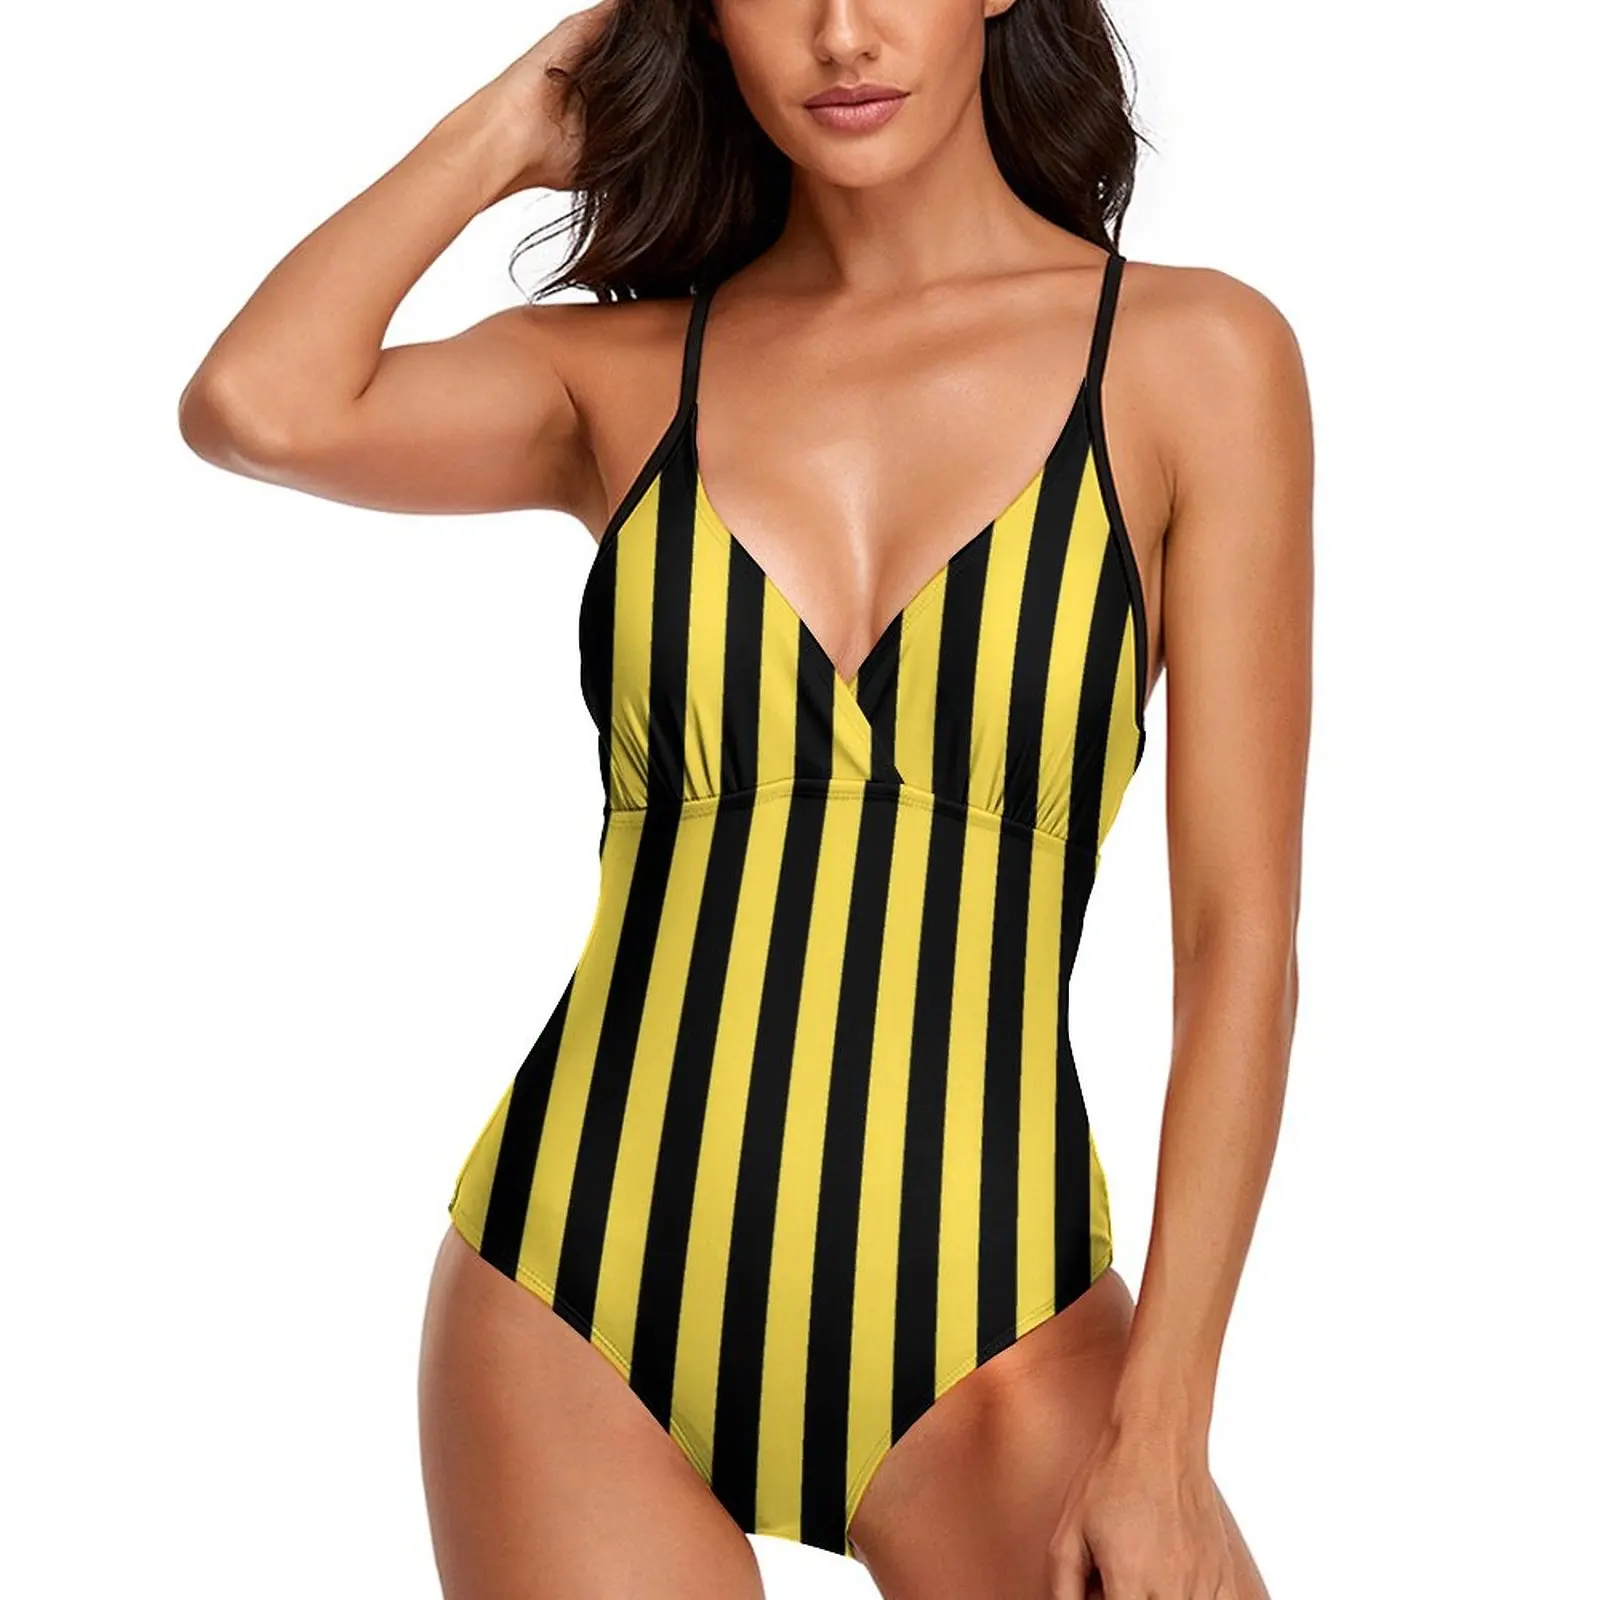 

Vertical Striped Swimsuit Sexy Black And Yellow One Piece Swimwear Women Push Up Swimsuits Sweet Bathing Suits Sling Beachwear